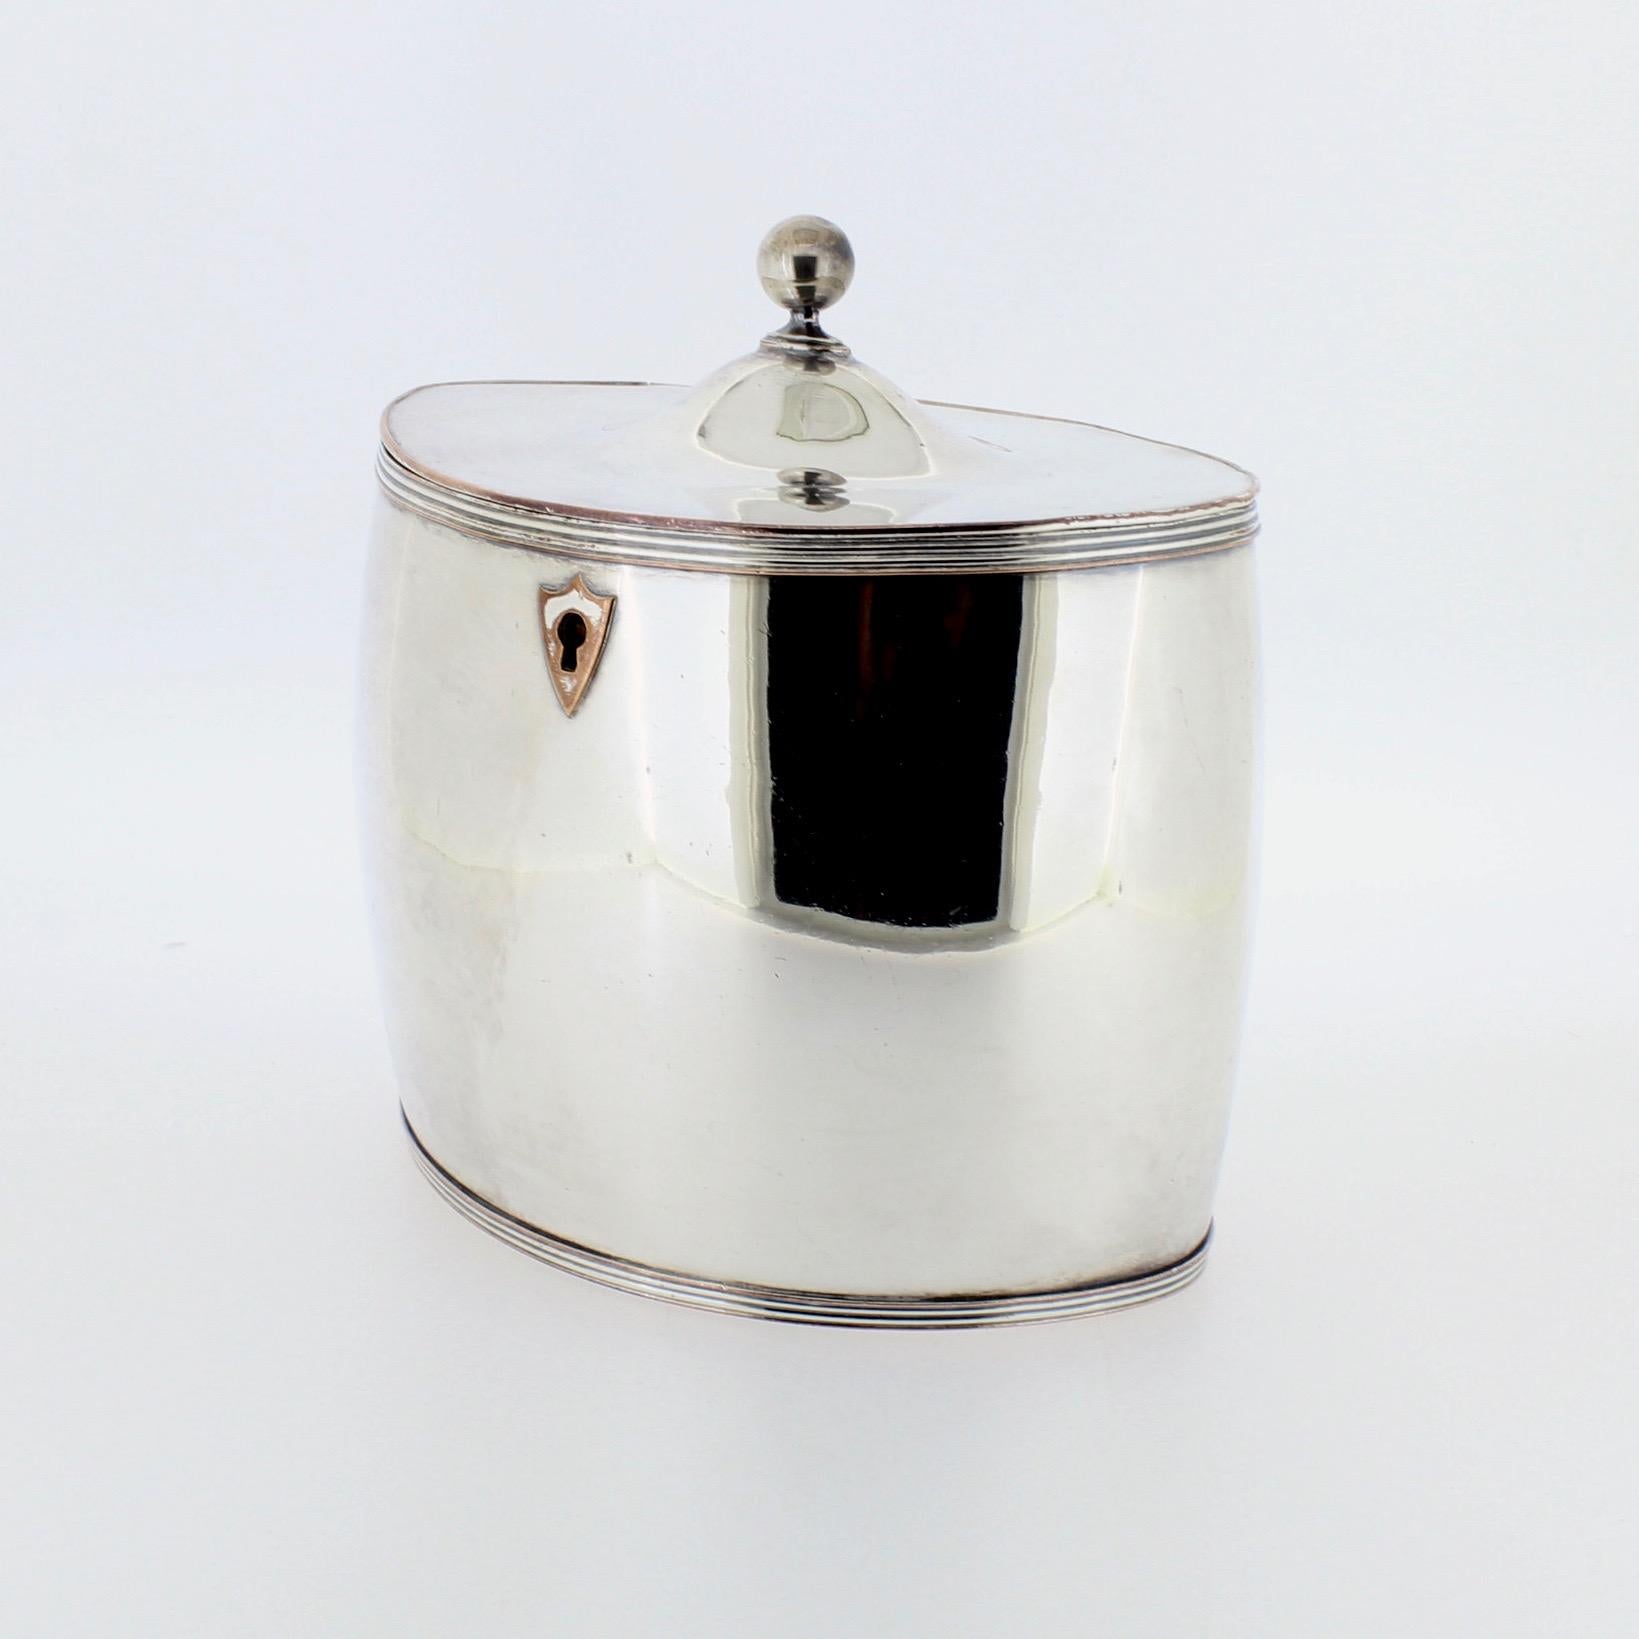 A fine, period Sheffield Plate tea caddy.

With simple streamlined lines of the early 19th century, a shield cartouche, and a ball finial.

Simply a wonderful antique Georgian tea caddy that perfectly dovetails with modern taste!

Width: ca. 5 1/4